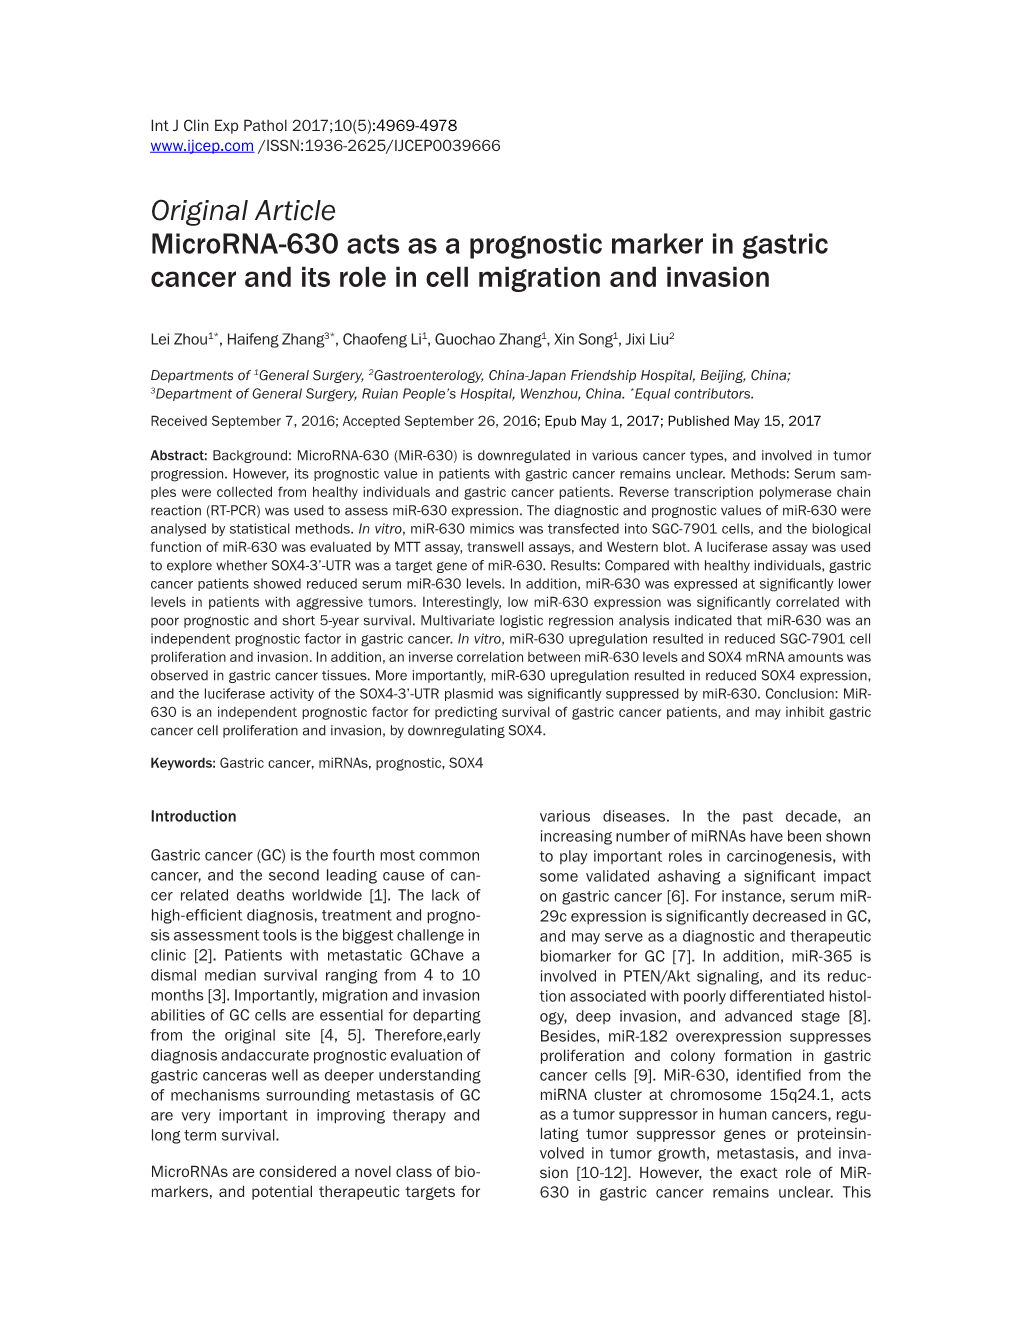 Original Article Microrna-630 Acts As a Prognostic Marker in Gastric Cancer and Its Role in Cell Migration and Invasion